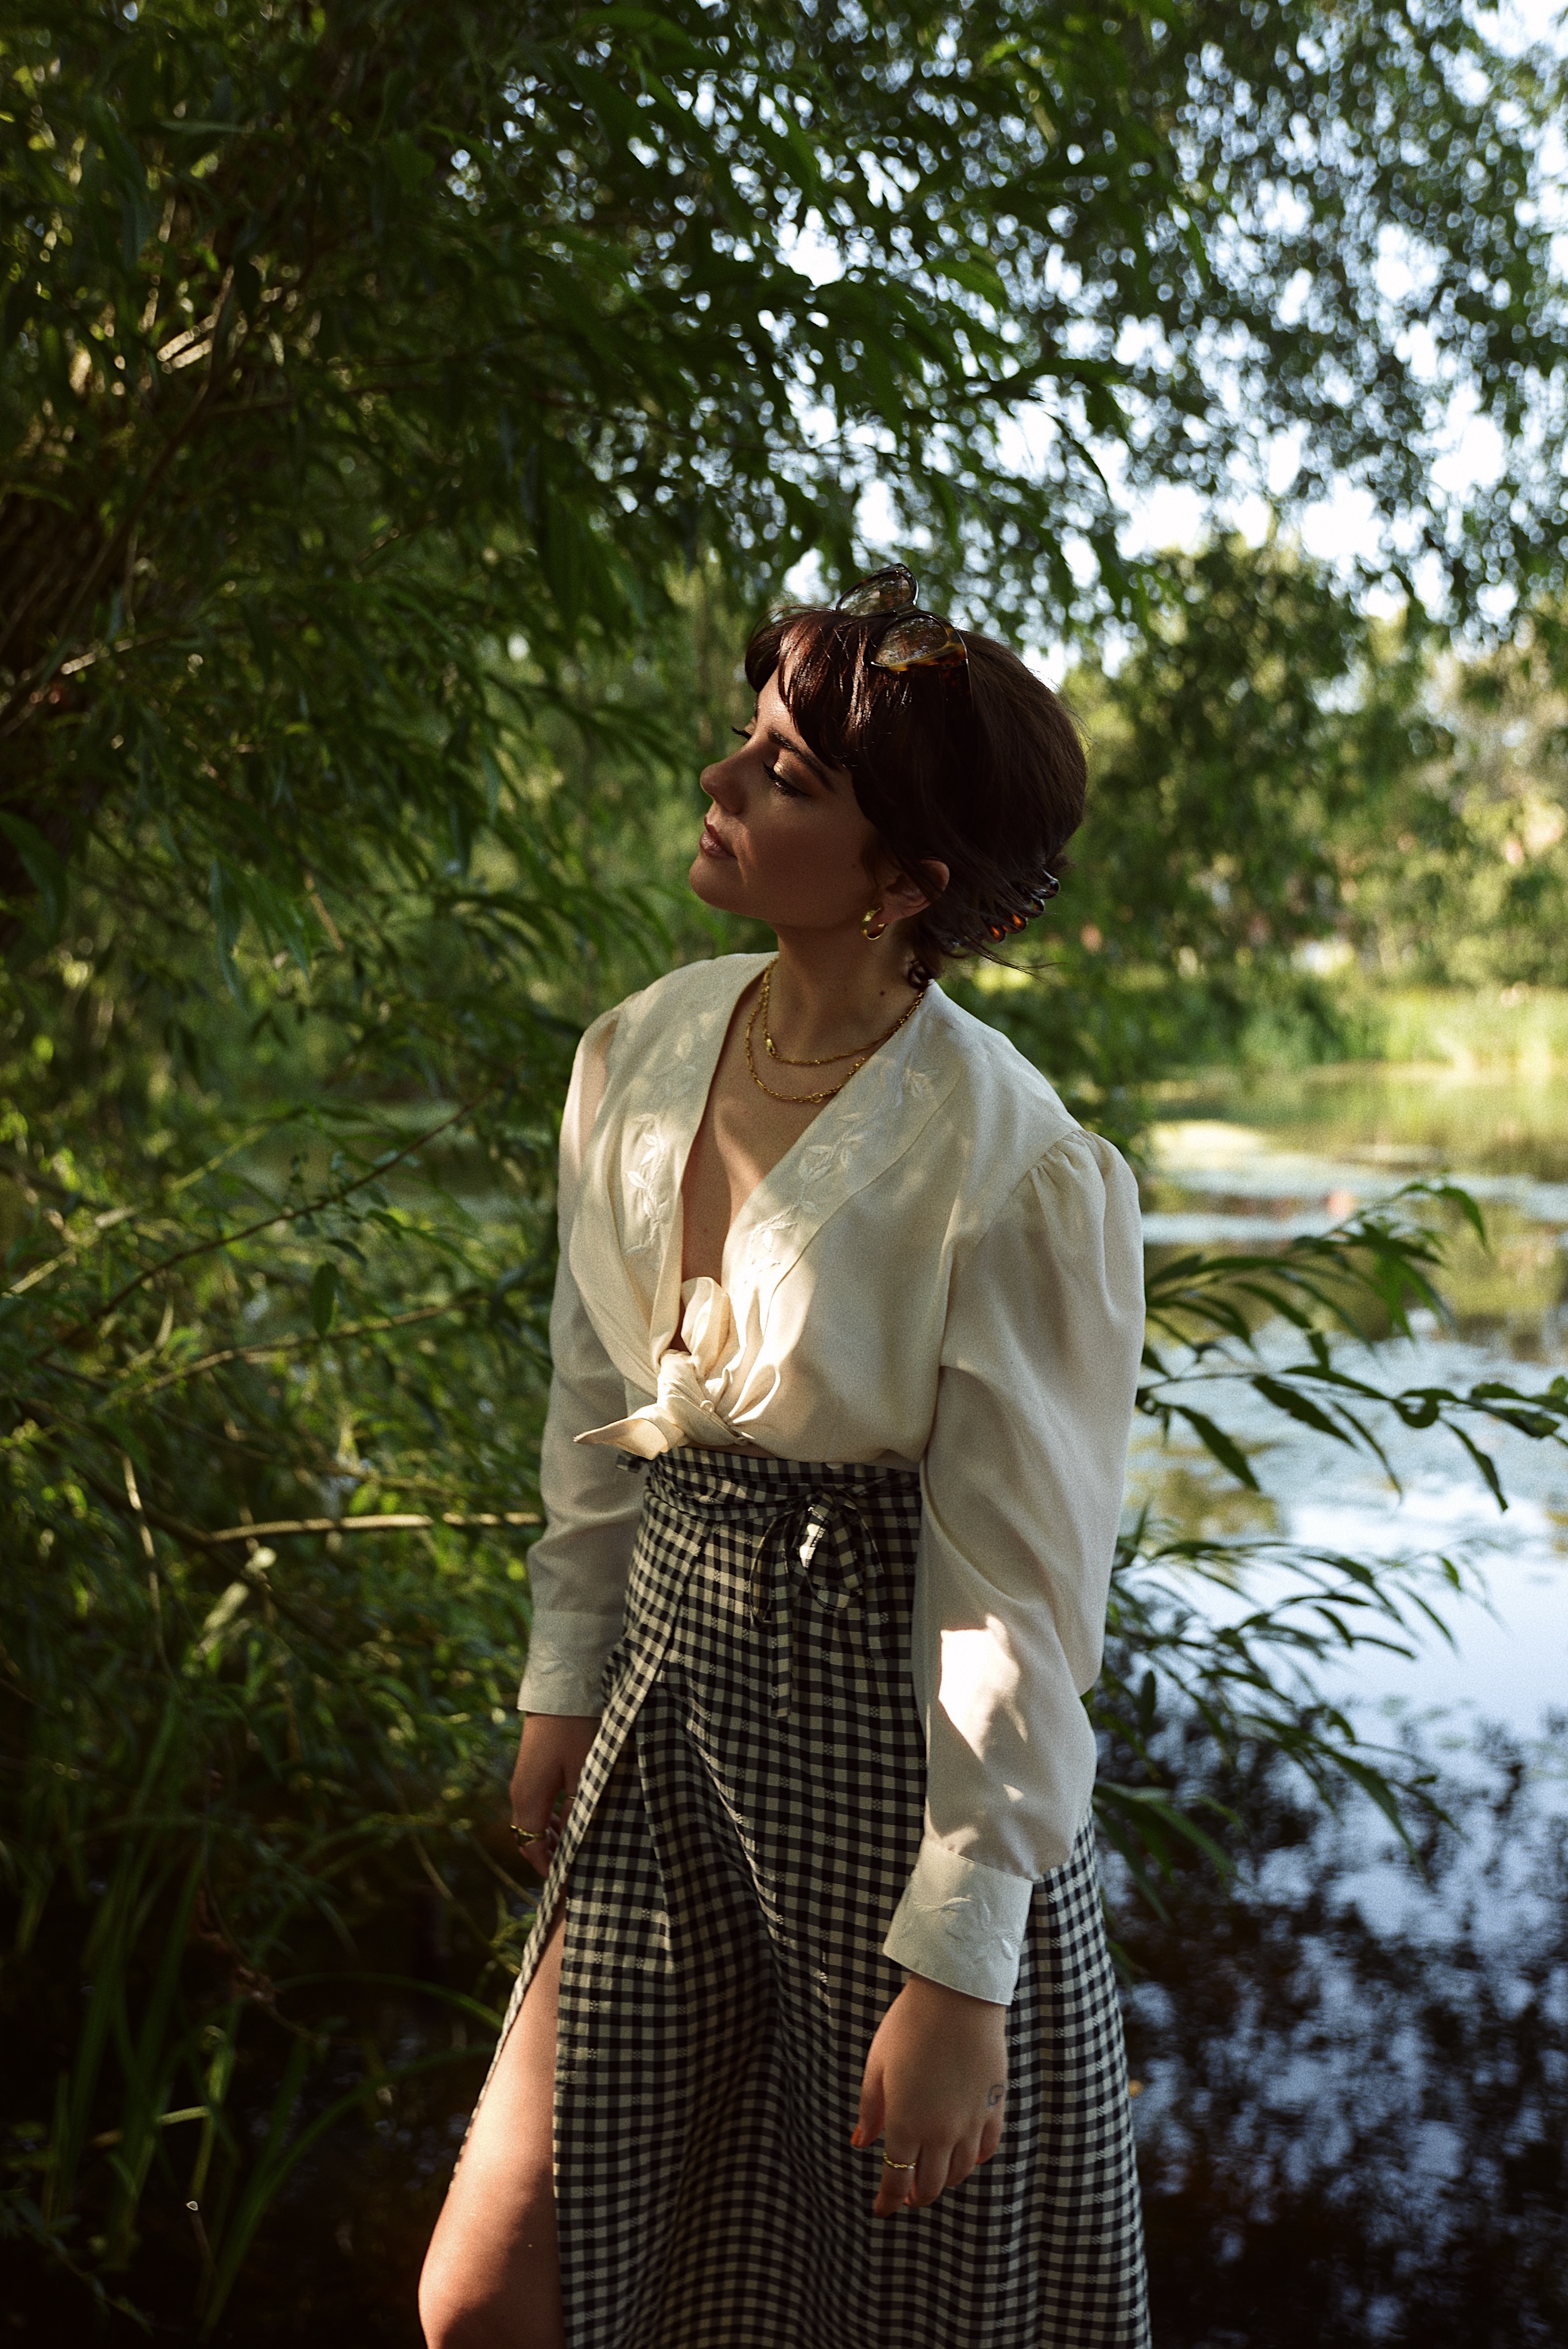 A VINTAGE OUTFIT IN A FIELD – Alice Catherine